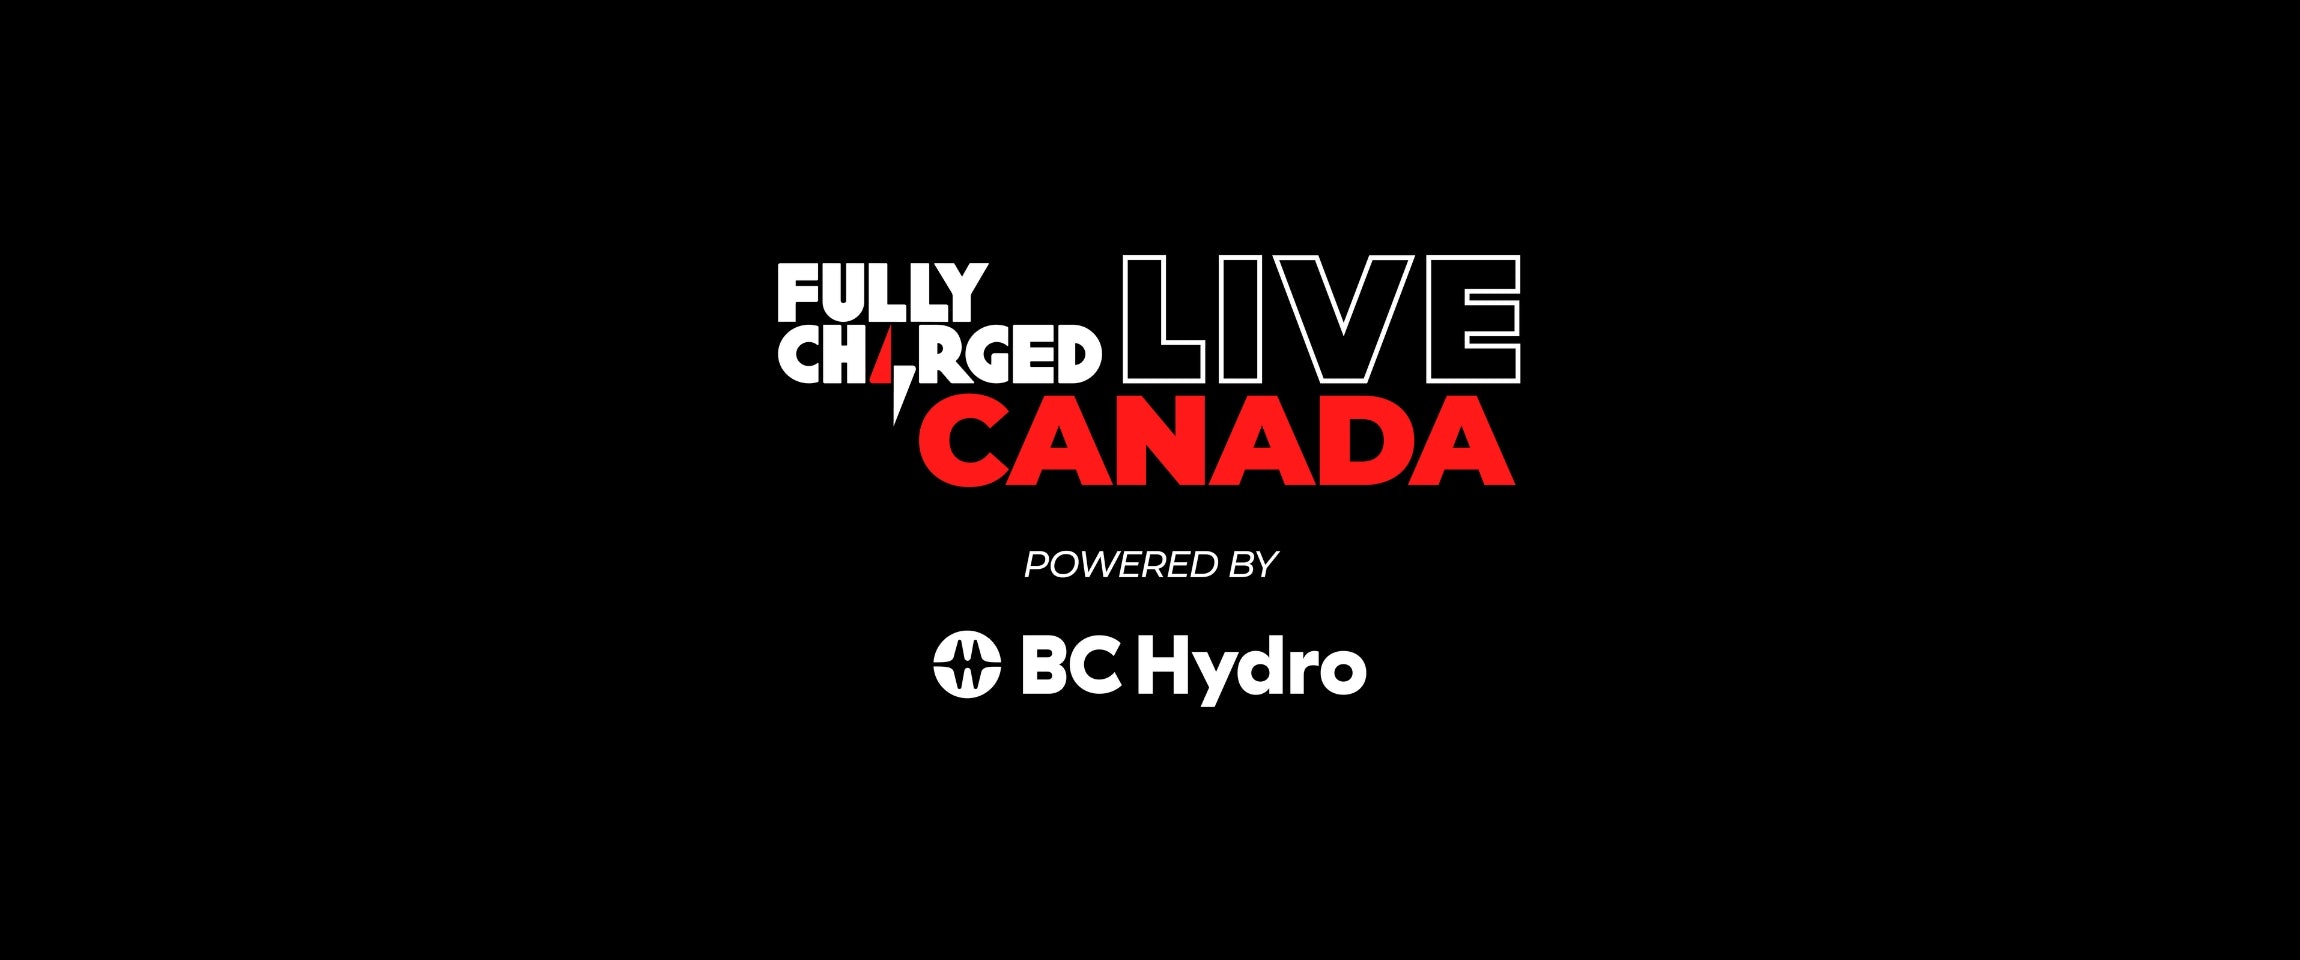 ENVO’s Presence at Fully Charged Live Canada